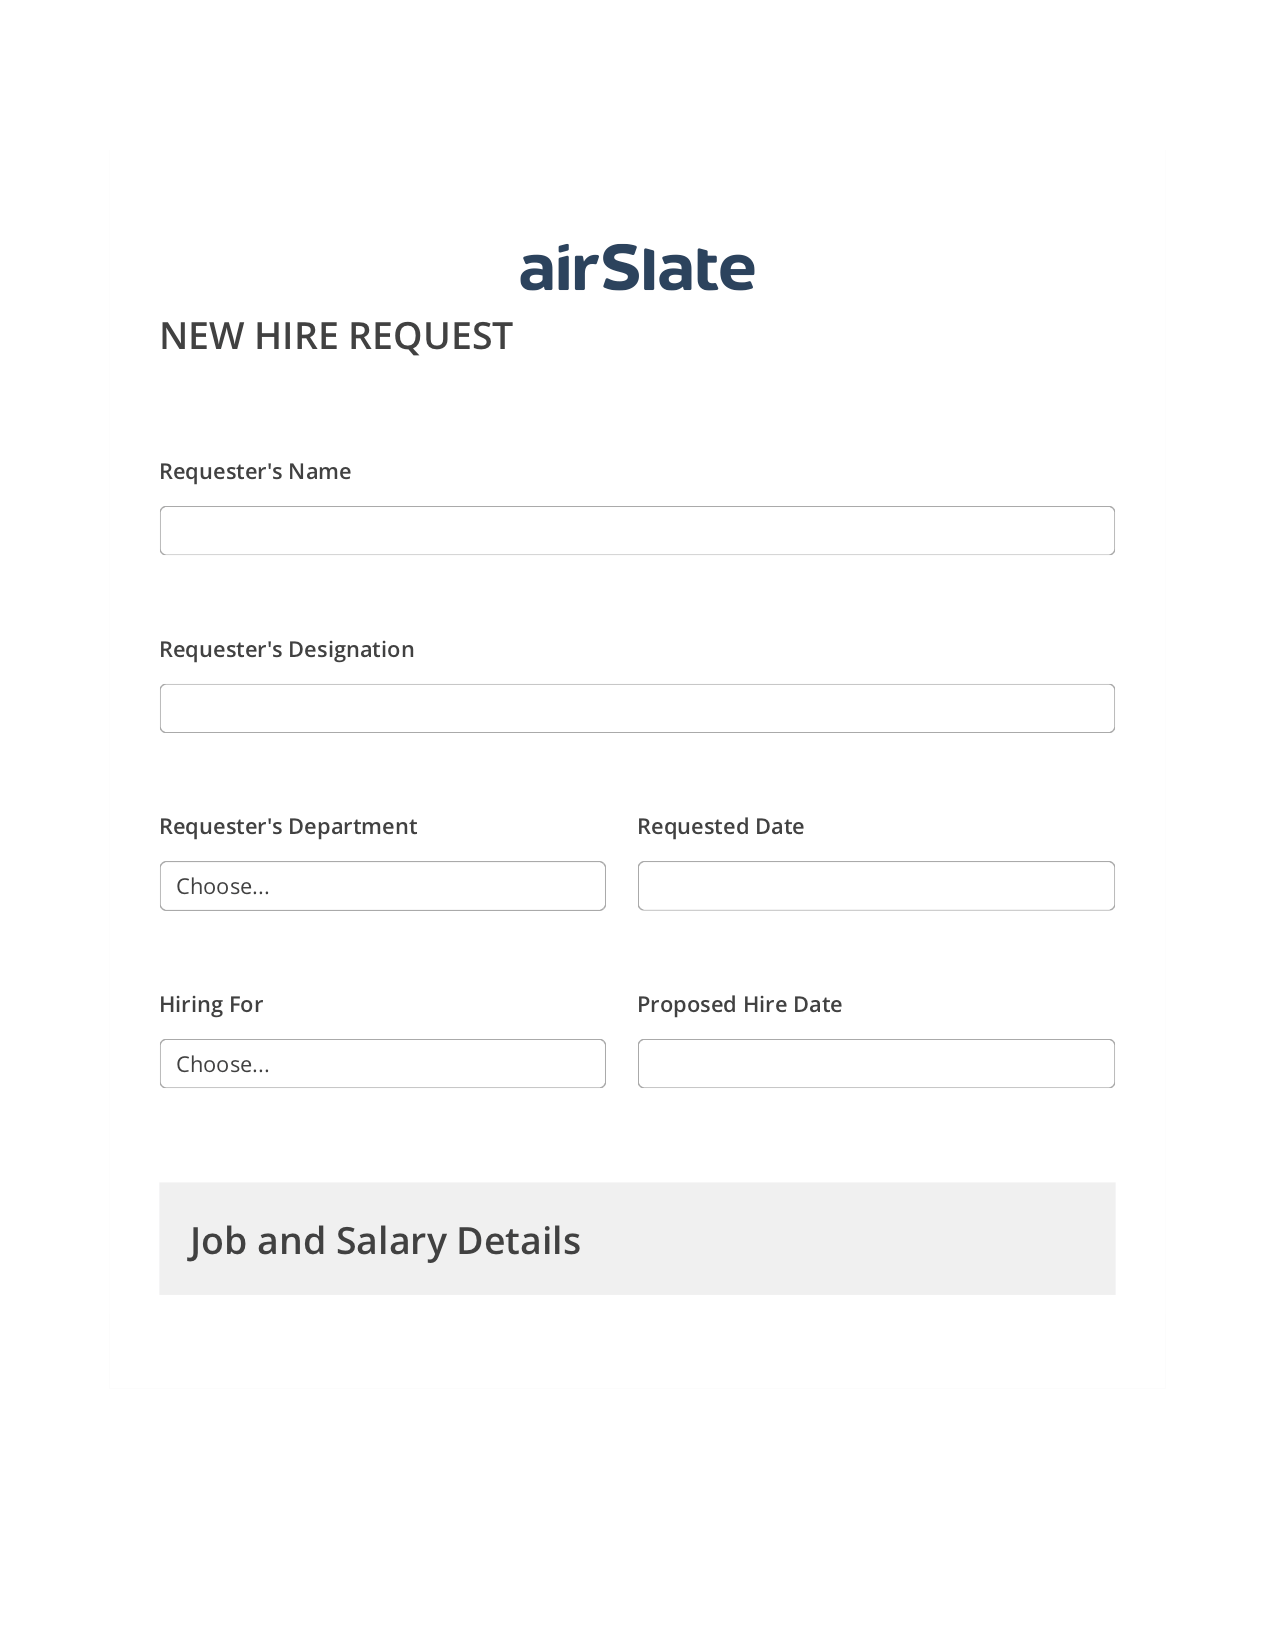 Hiring Request Workflow Prefill from NetSuite records, Open under a Role Bot, Archive to Box Bot